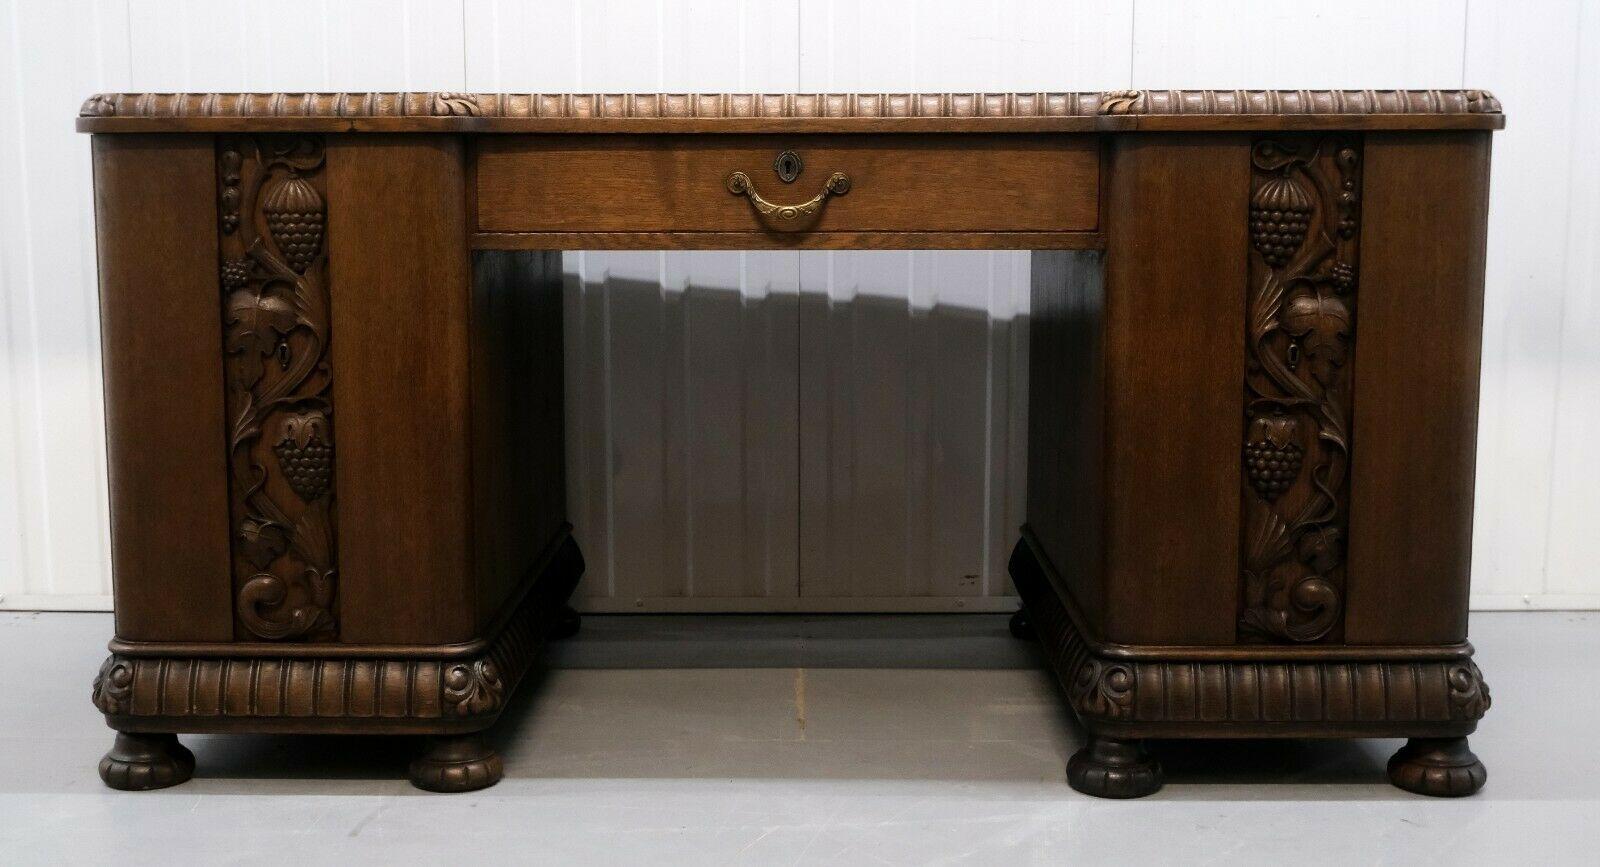 We are delighted to offer for sale this stunning very solid and heavy, early 20th century carved oak desk in one piece.

The practical desk is well decorated with vine leaves and grapes on the front doors. The rich brown colour and detailing